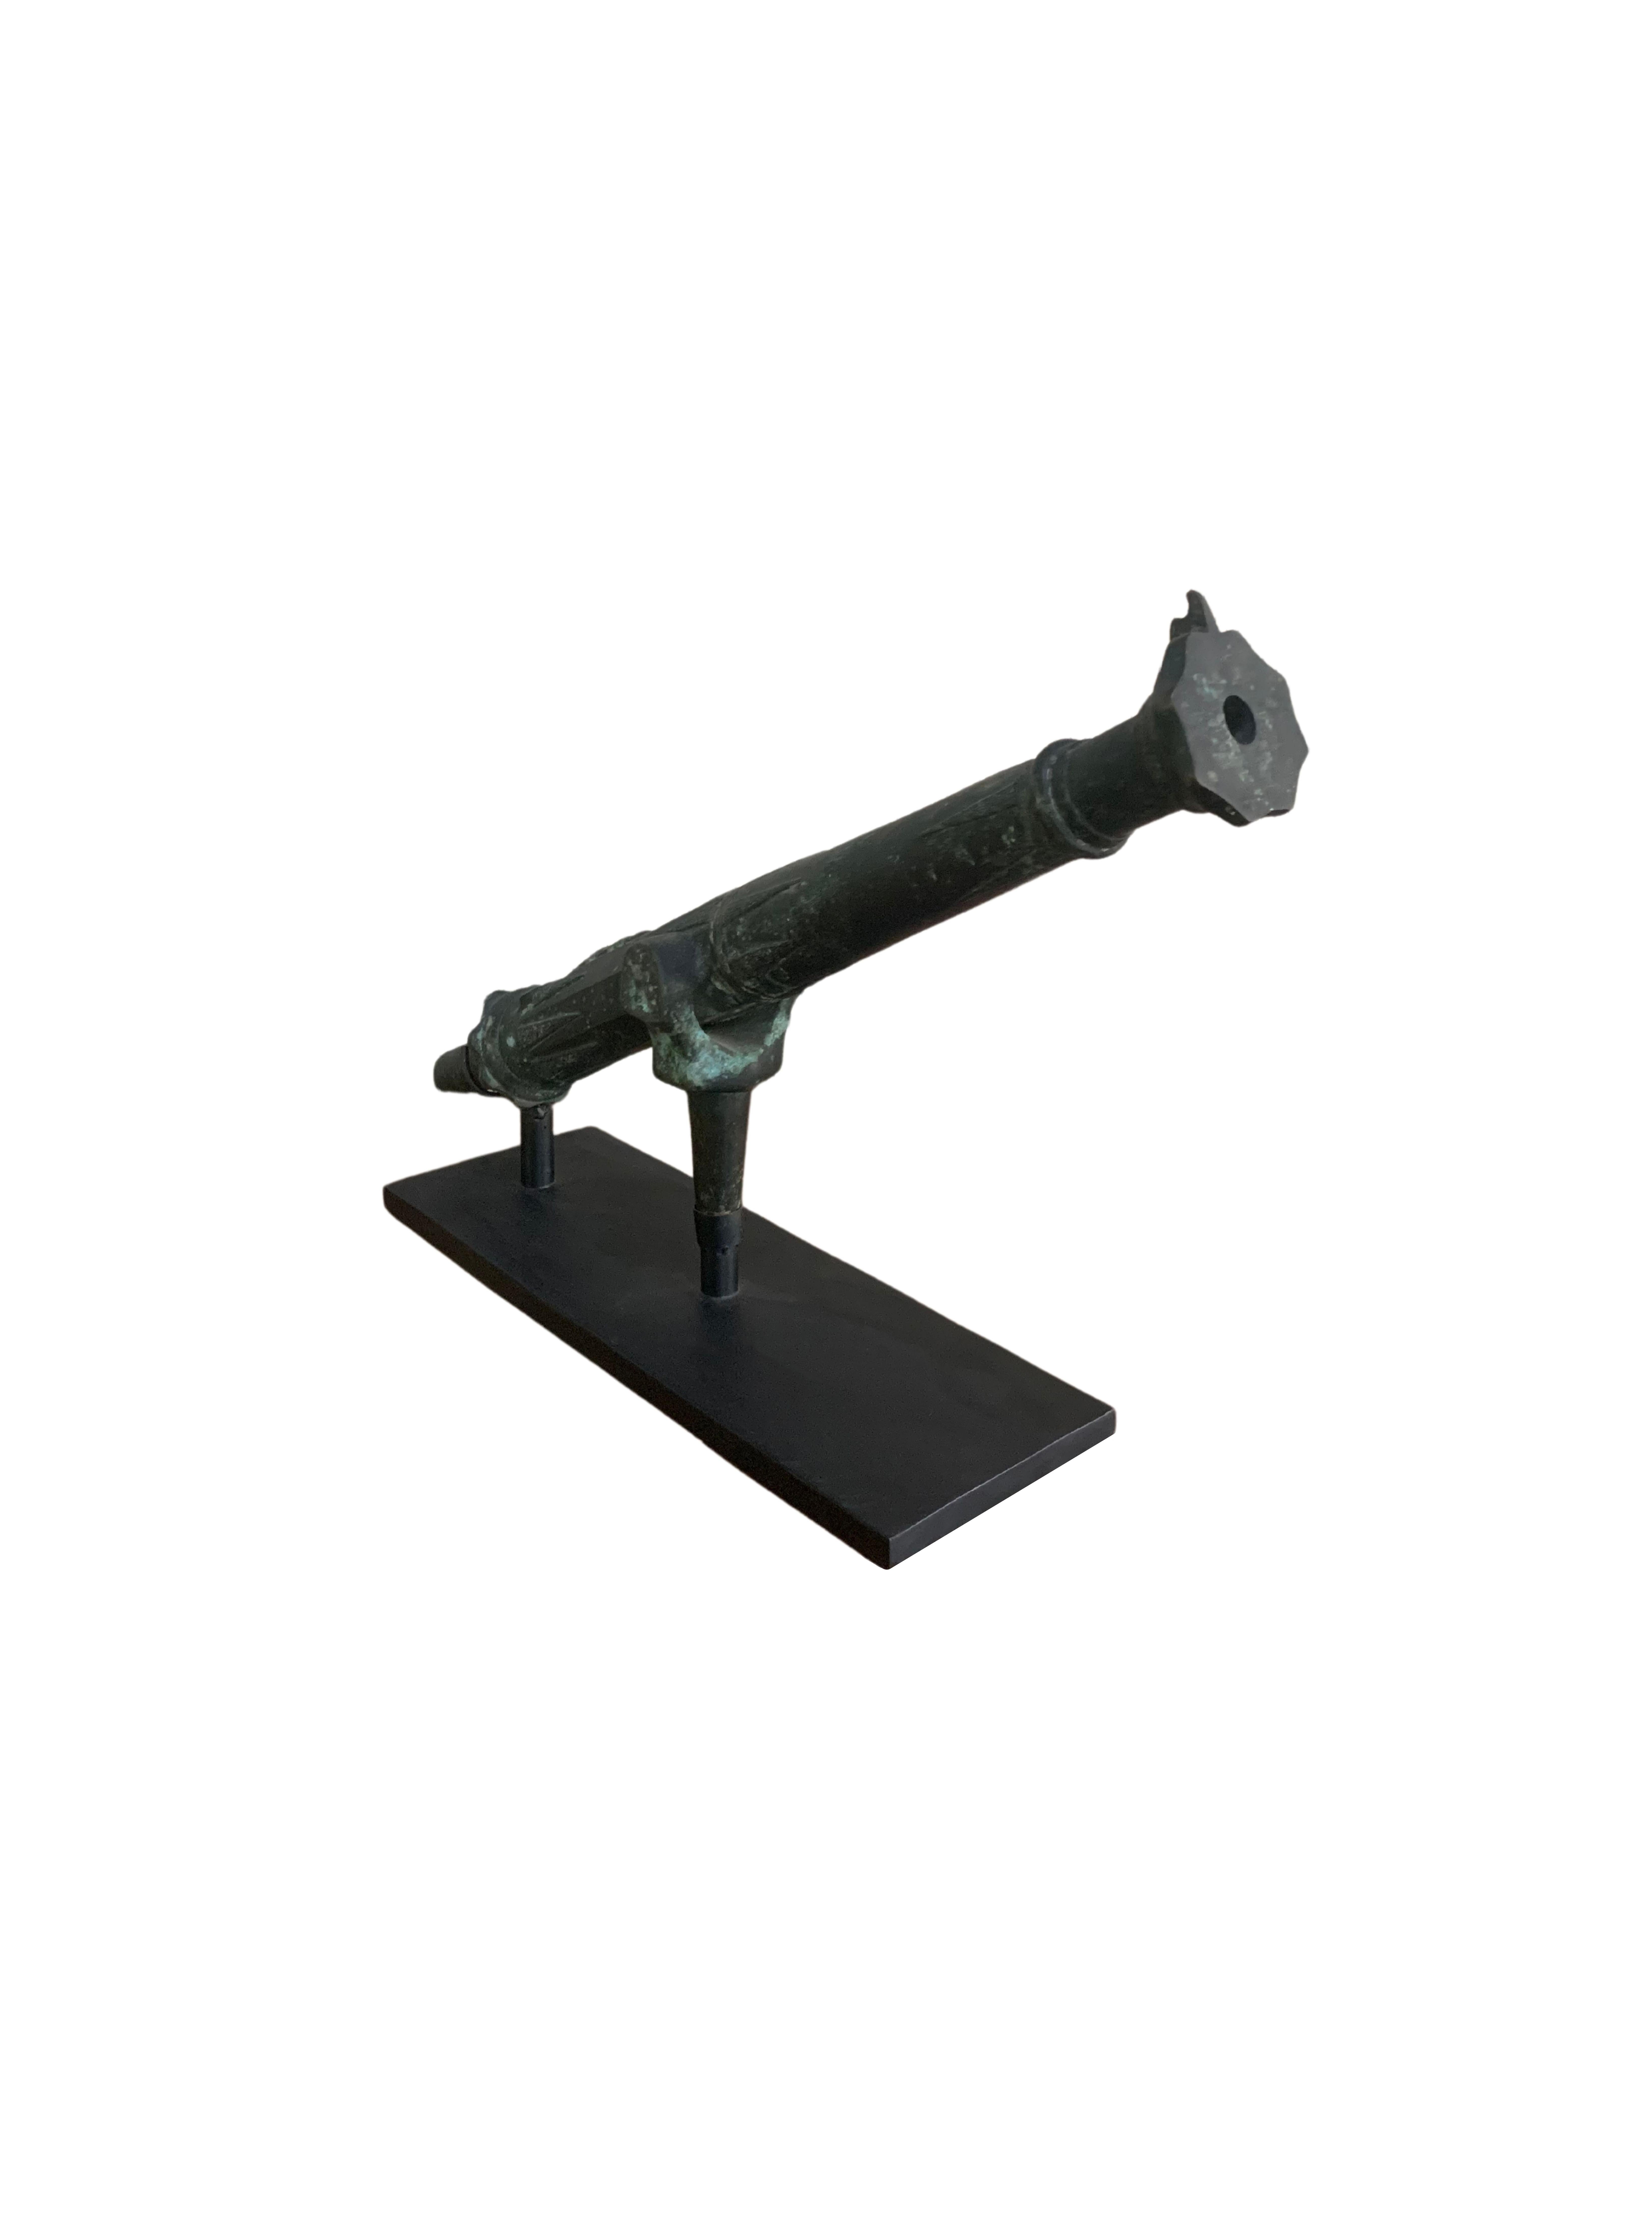 A great example of a Lantaka cast-bronze cannon which would have once been mounted on a mercant vessel. Cannons such as this one were crafted in a range of sizes depending on the vessel and were used as both signalling devices or artillery. The